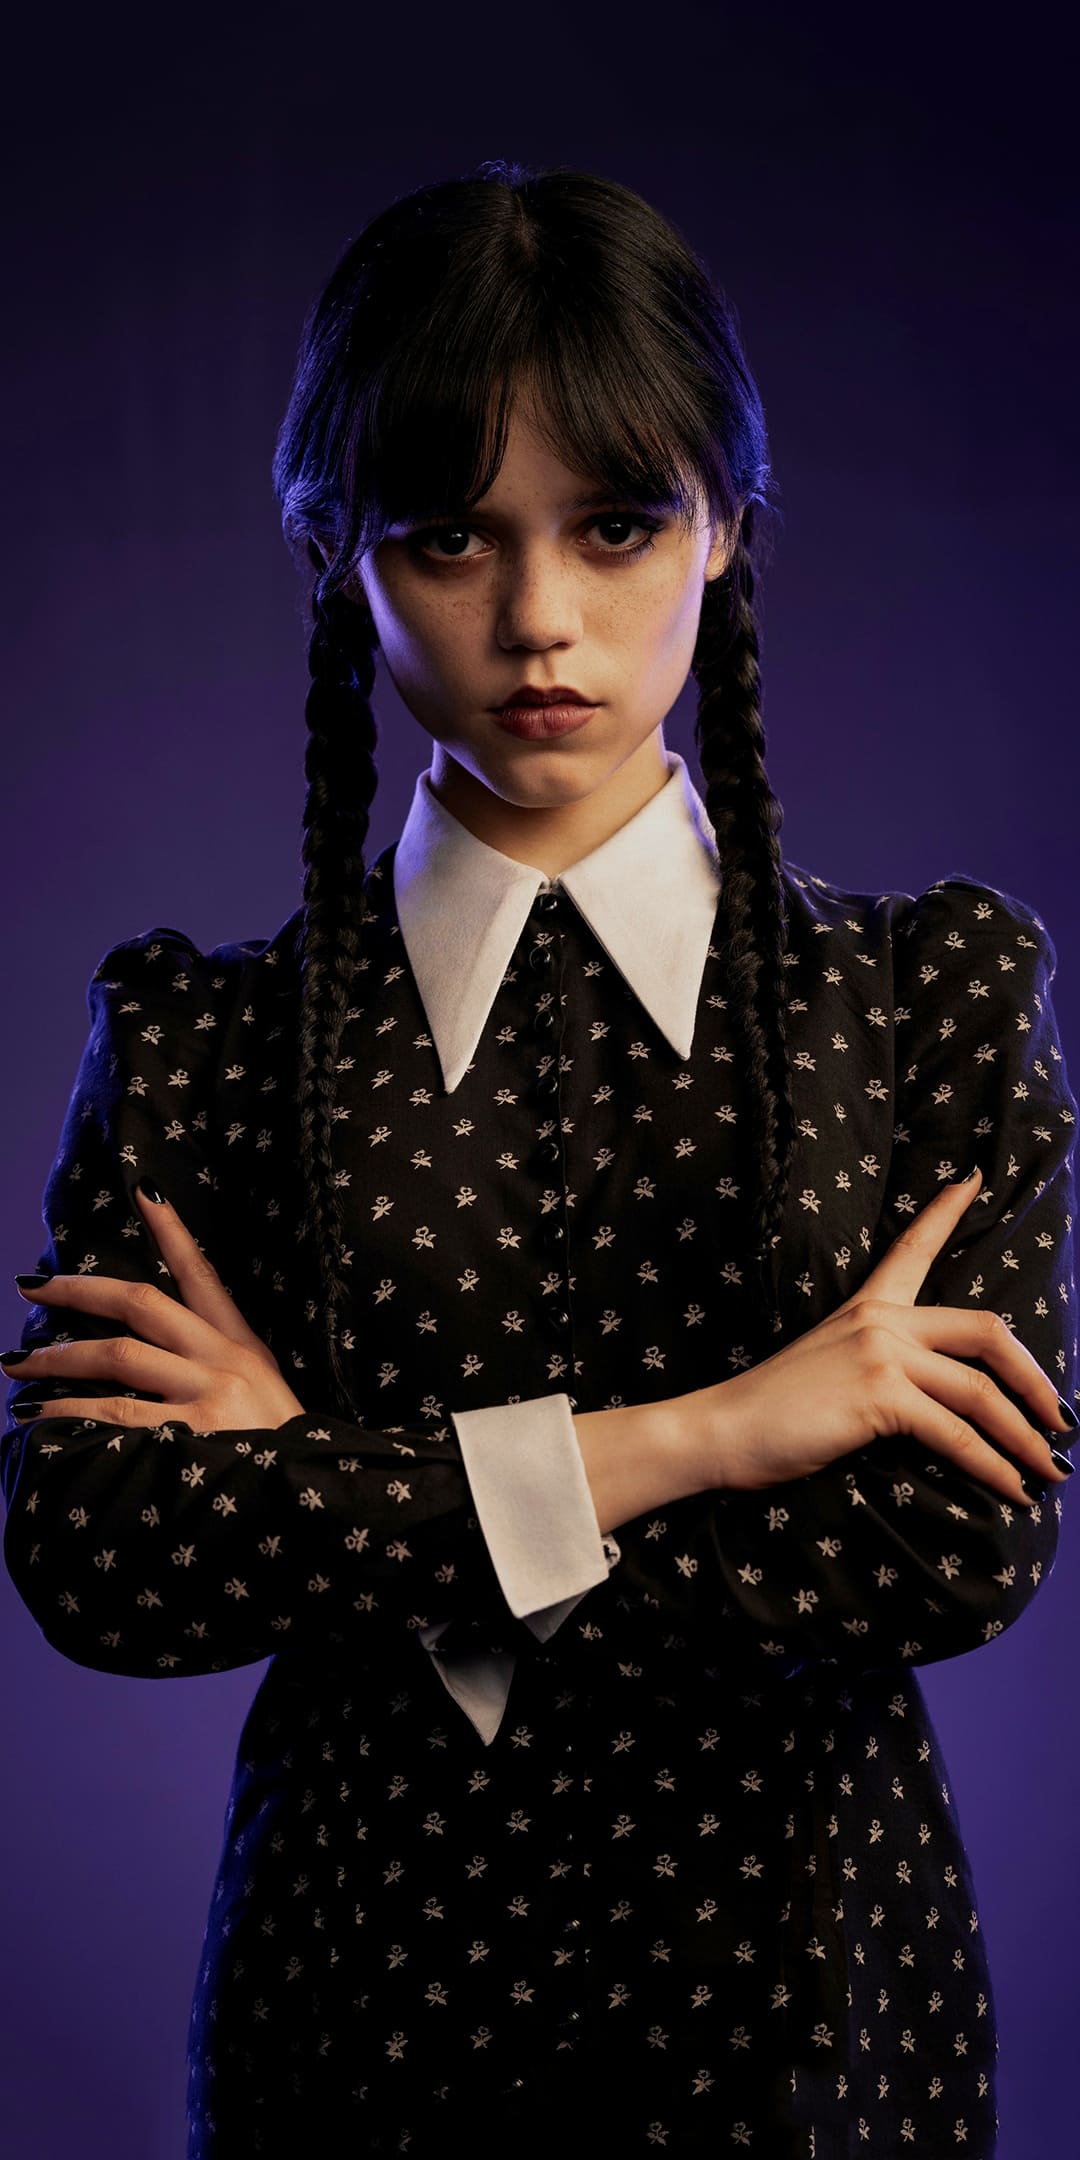 Wednesday Addams Iphone X Wallpapers Free Download - Wednesday